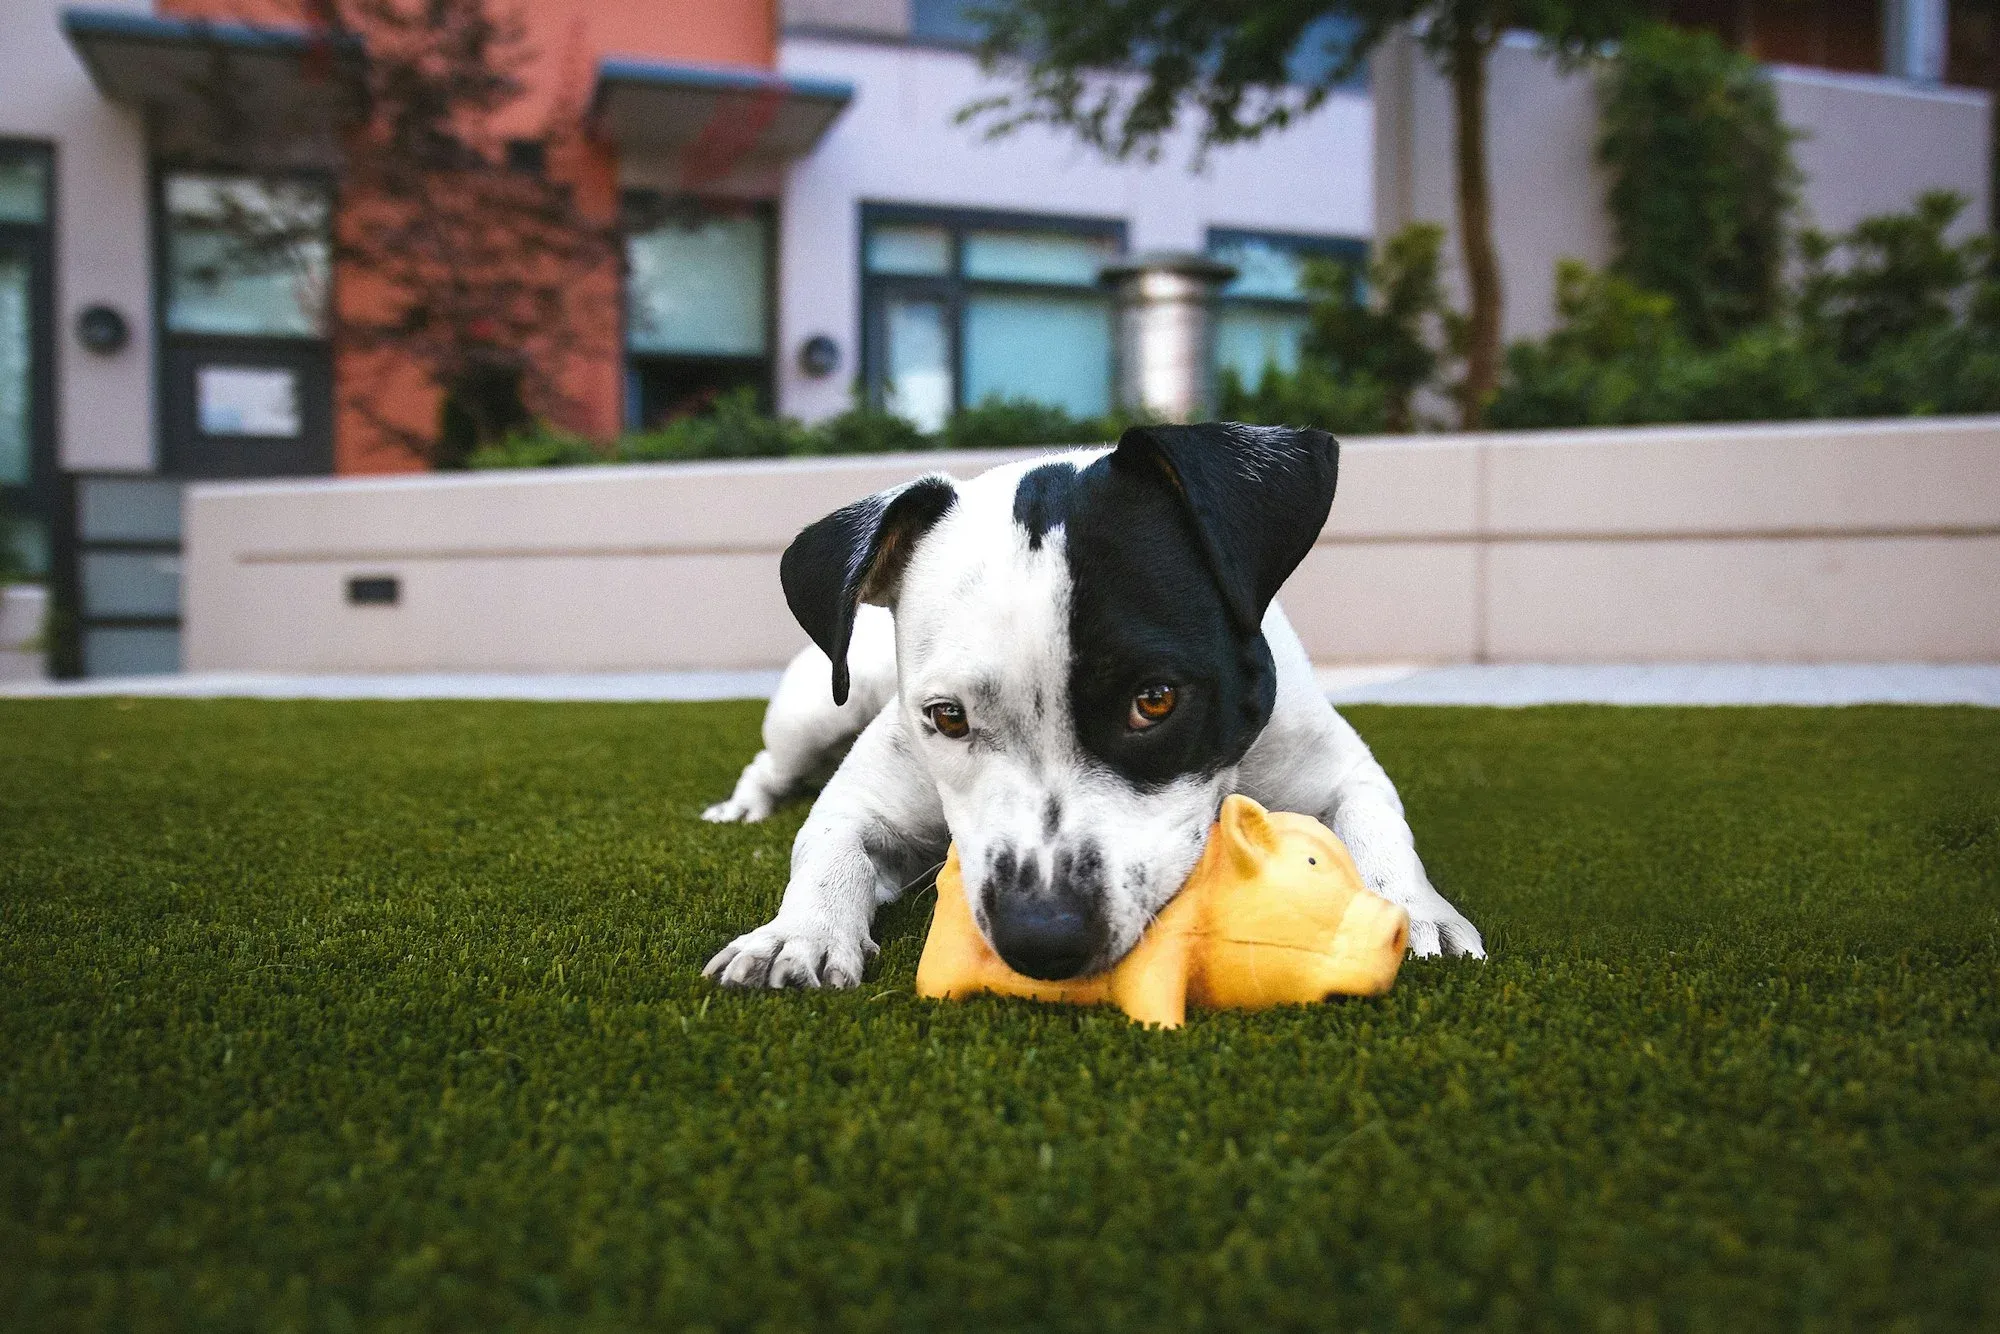 When should I throw away my dog’s toys?